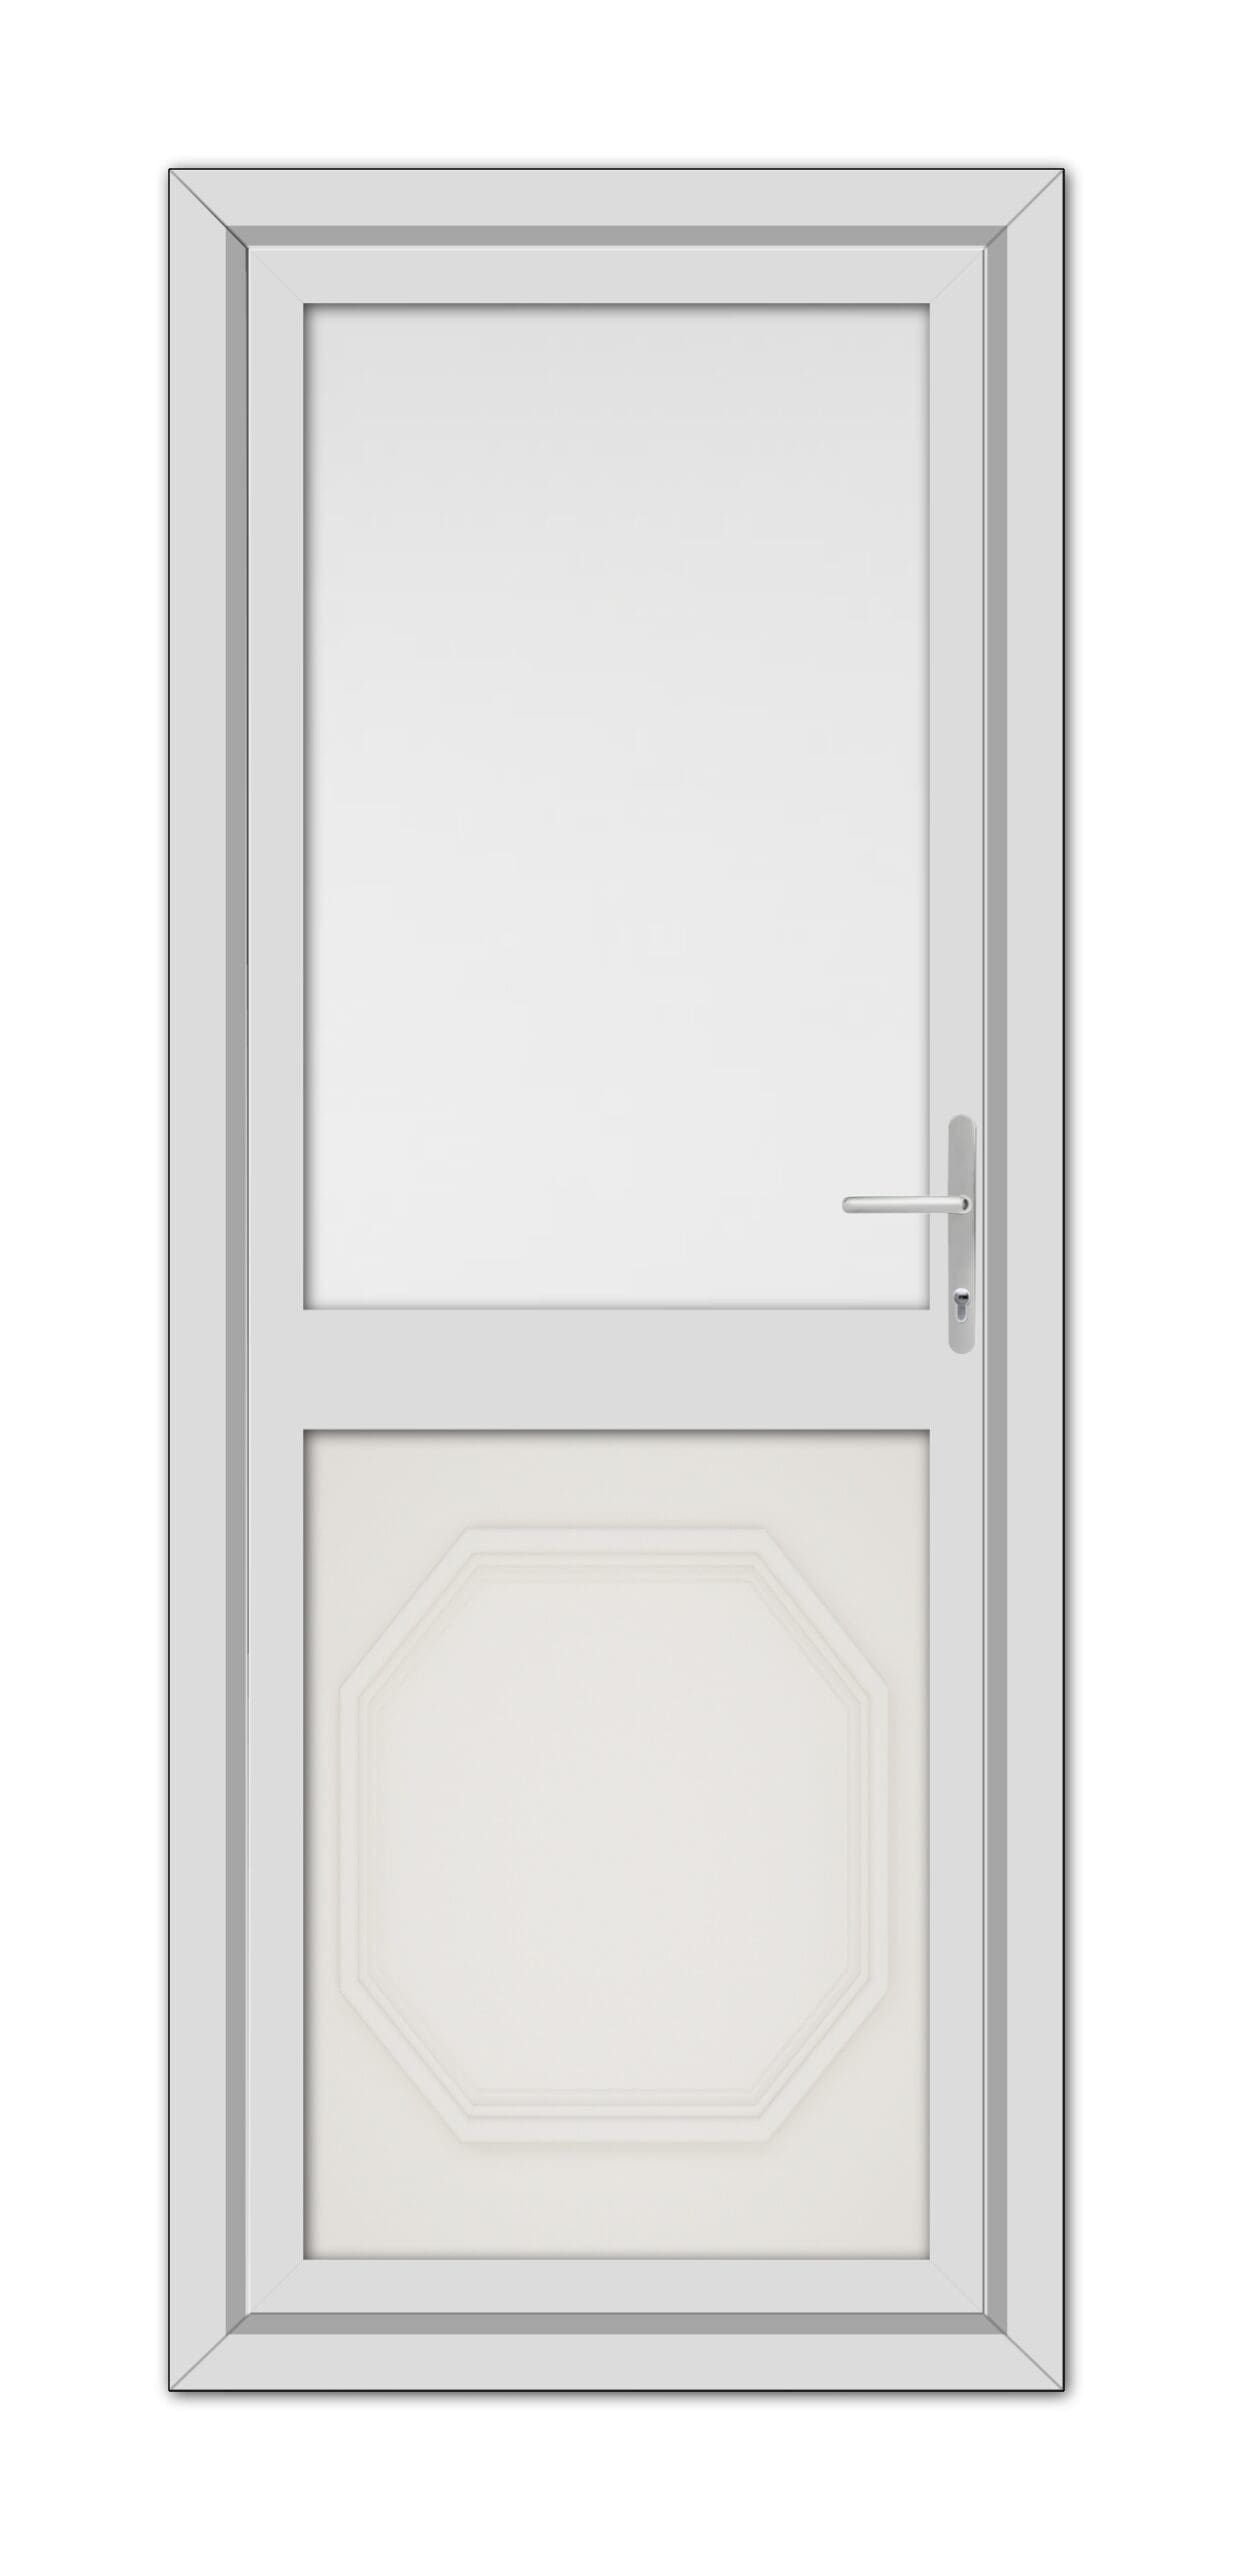 A modern White Cream Buckingham Half uPVC Back Door with a geometric hexagonal panel at the bottom and a square glass window at the top, equipped with a metallic handle on the right side.